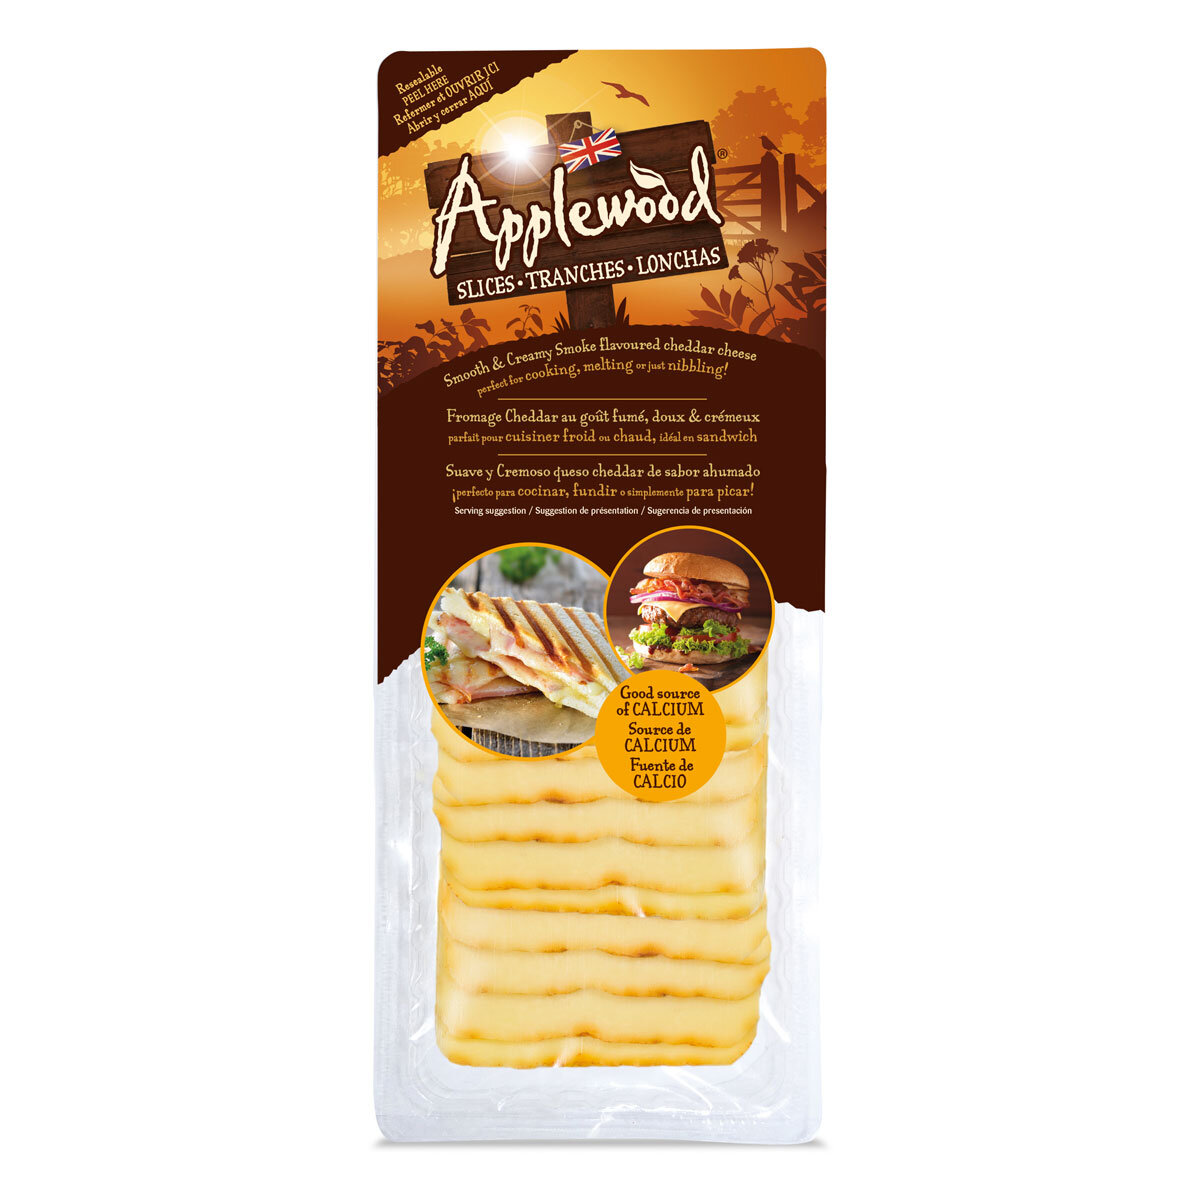 Image of packaging for Applewood Cheese Slices